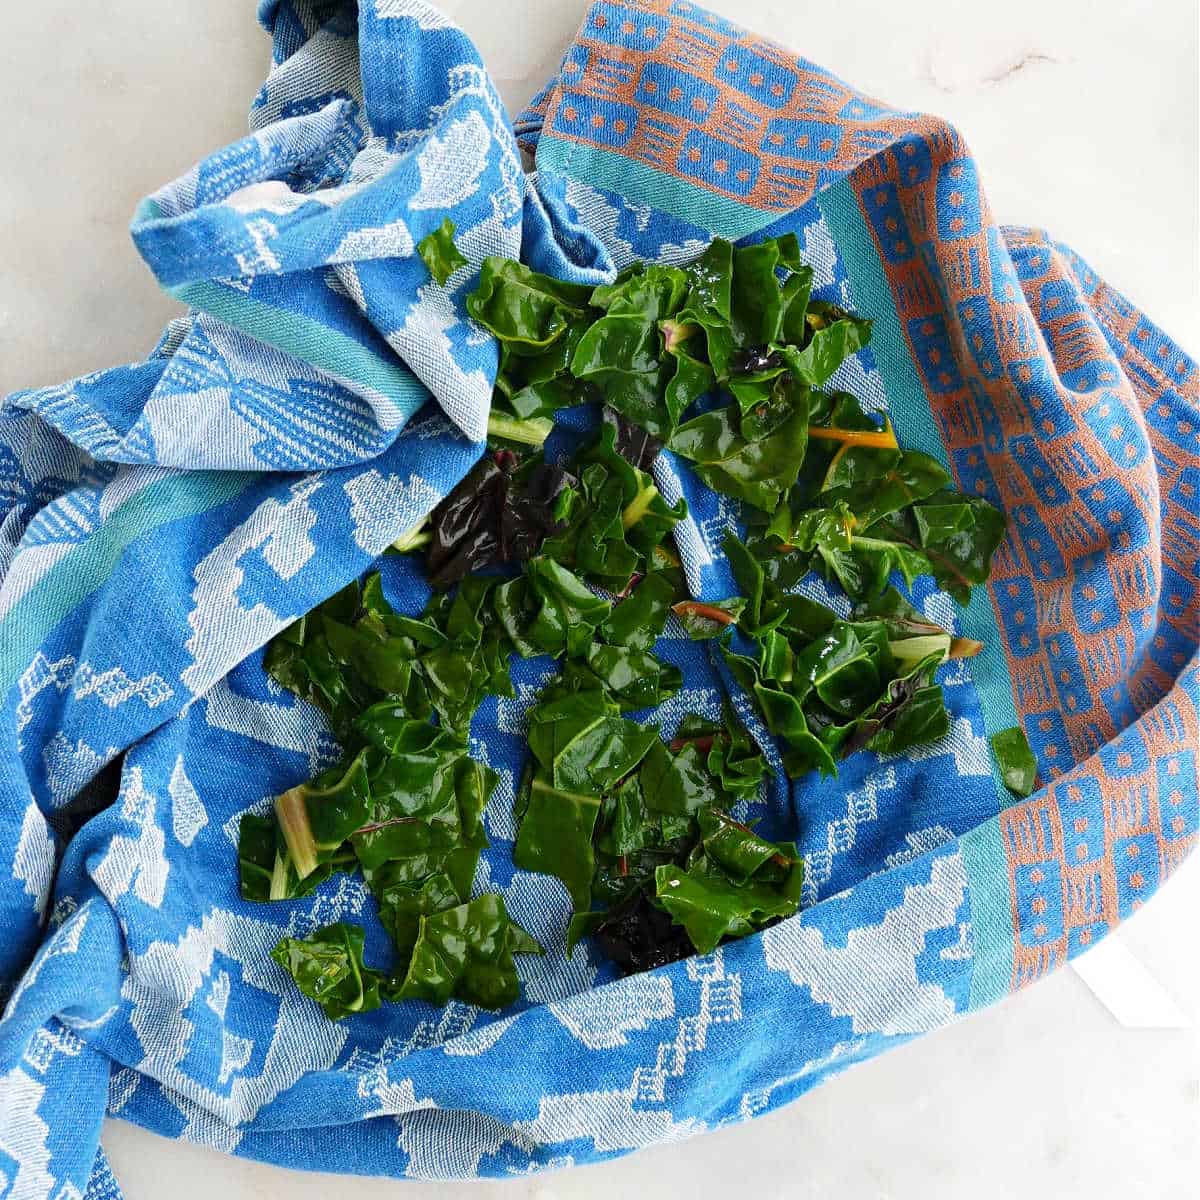 Swiss chard leaves being dried in a dish towel on a counter